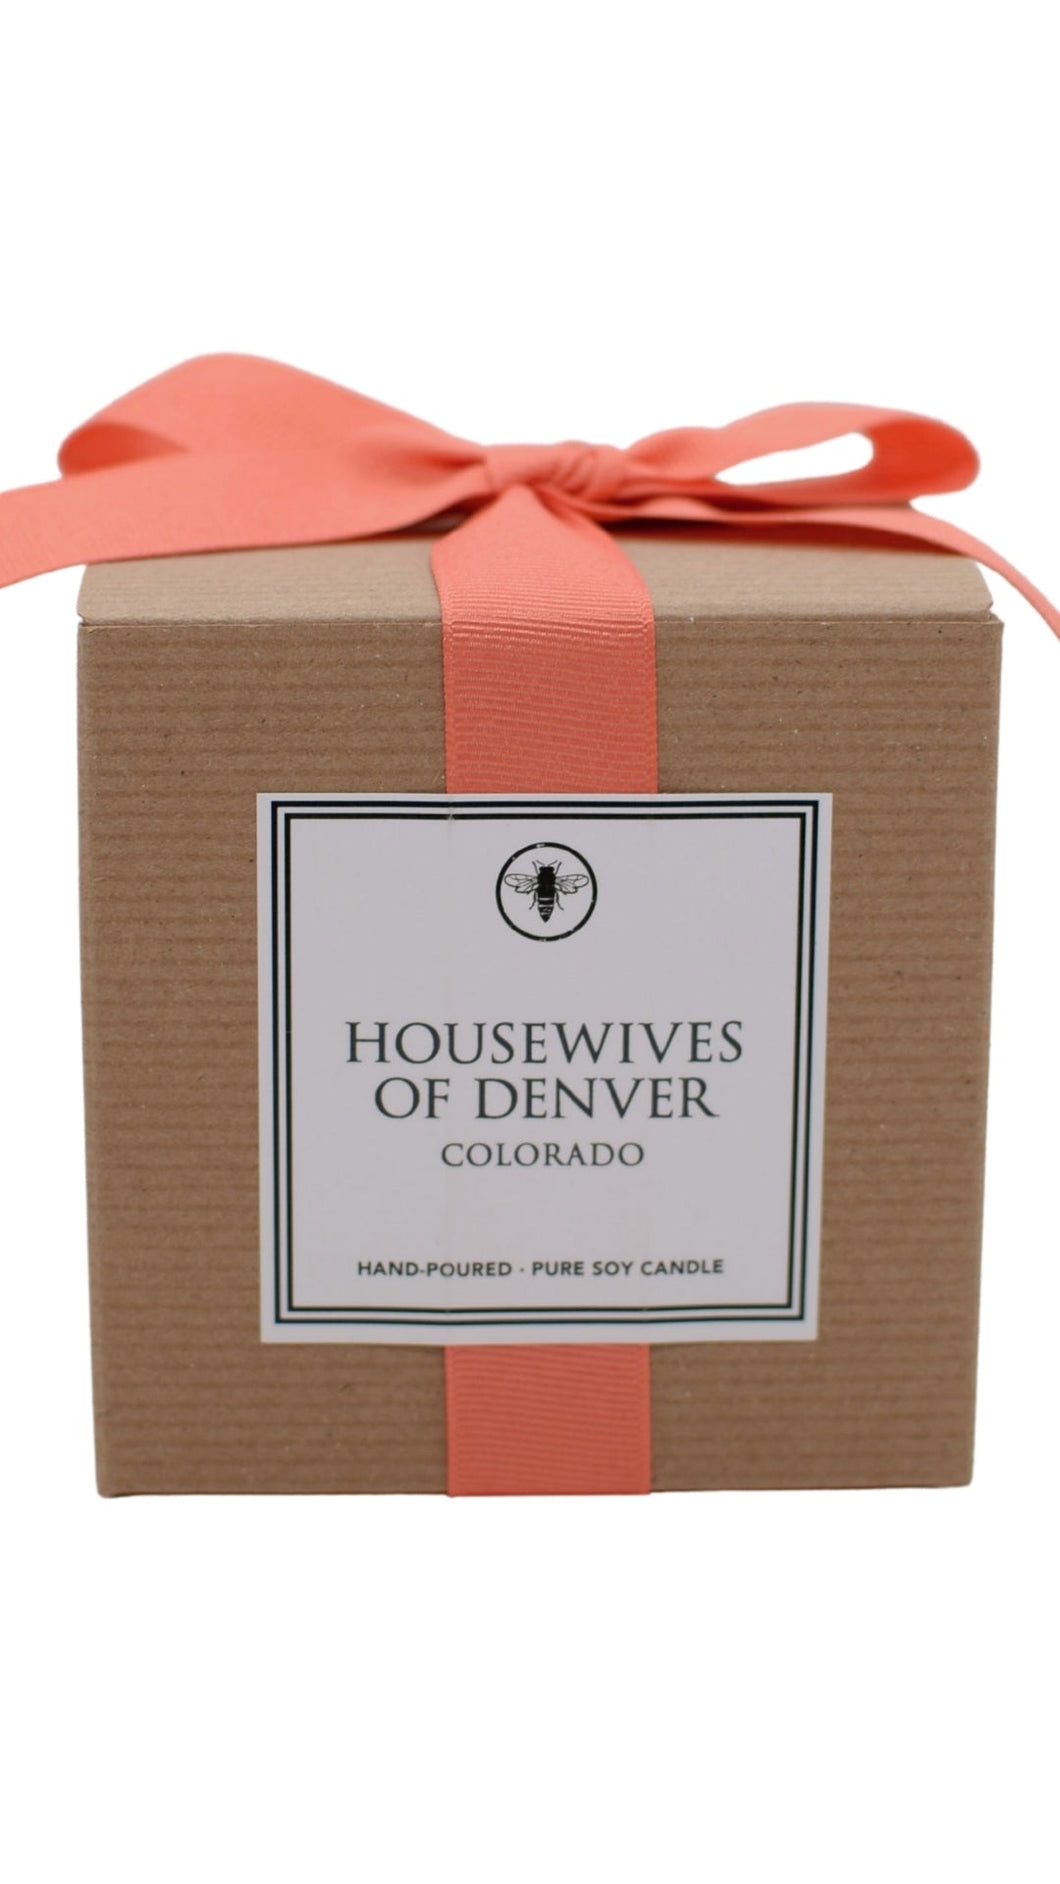 Housewives of Denver Candle